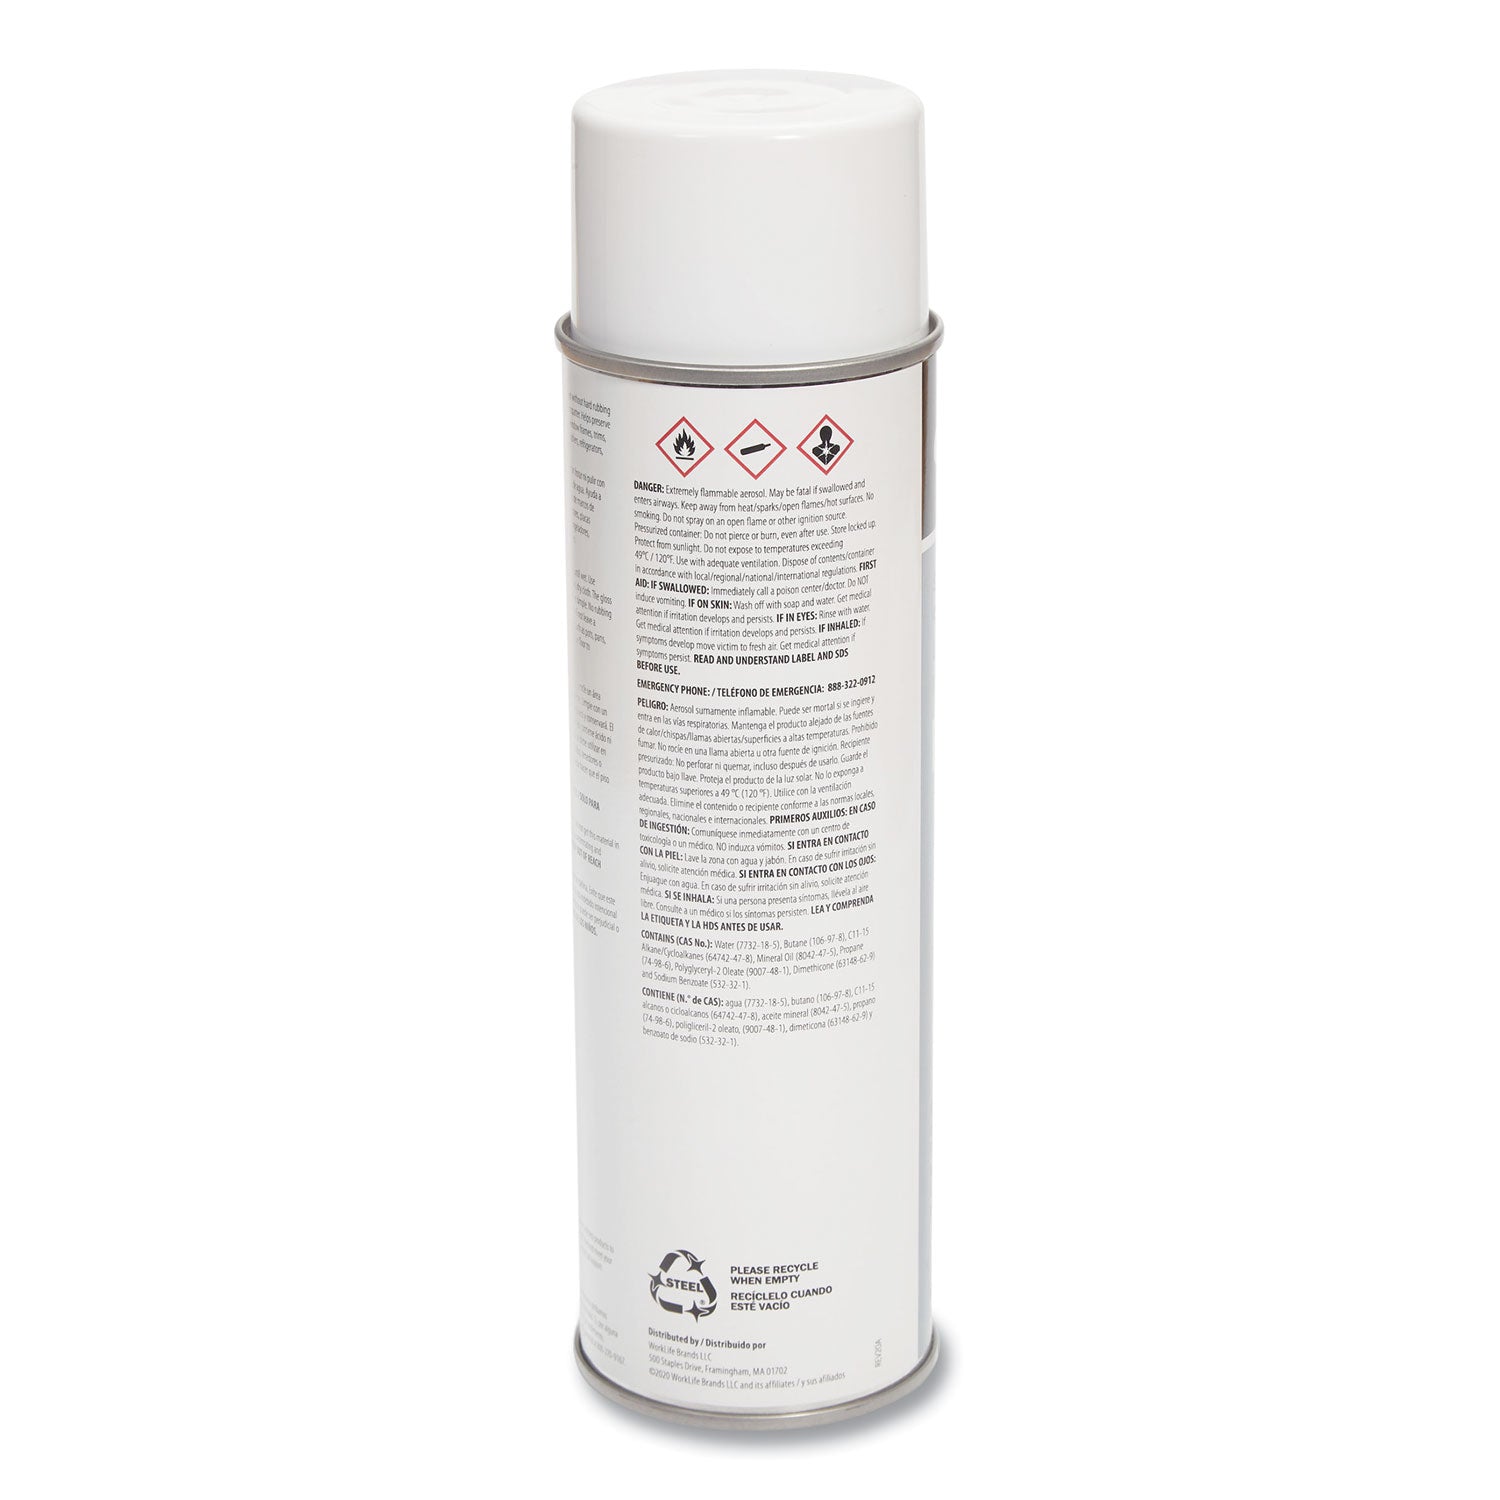 stainless-steel-cleaner-and-maintainer-fresh-and-clean-16-oz-aerosol-spray-6-carton_cwz58498a50877 - 4